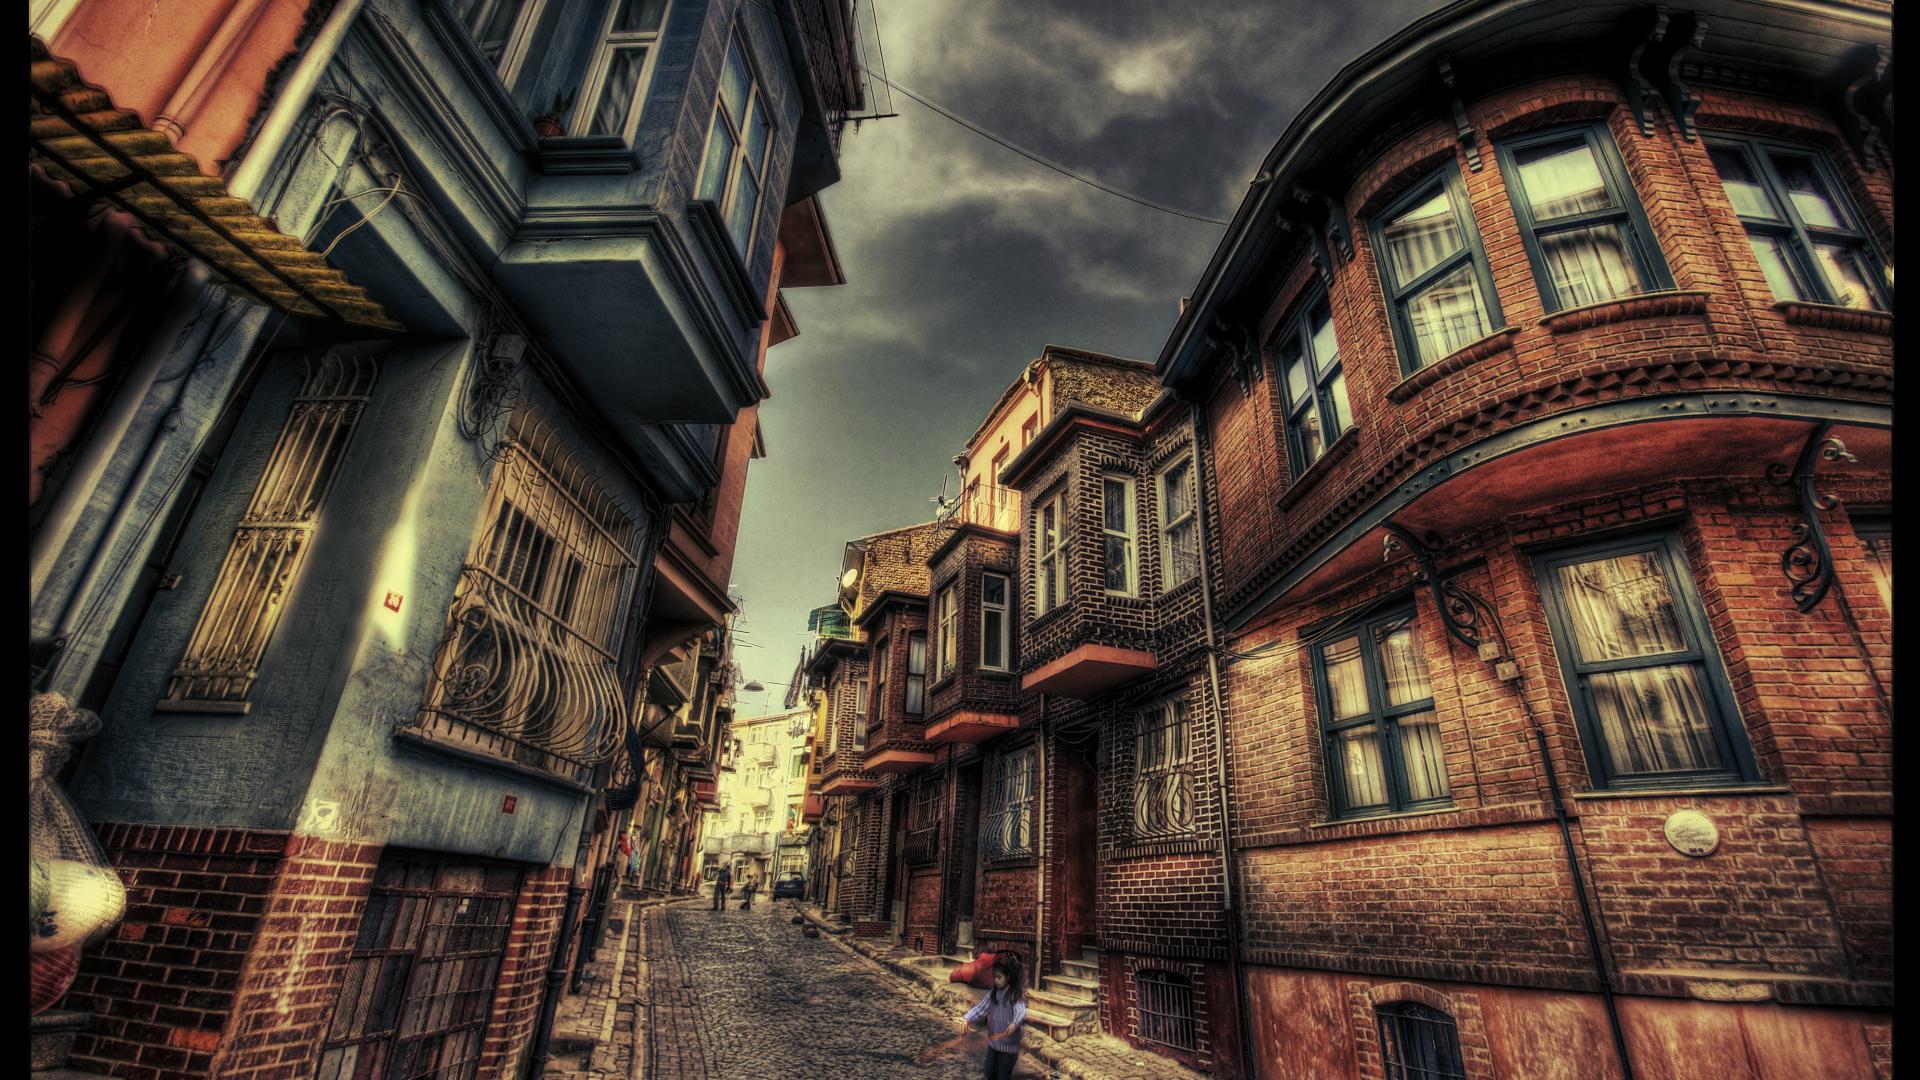 turkey, street, photography, hdr, building, city, man made